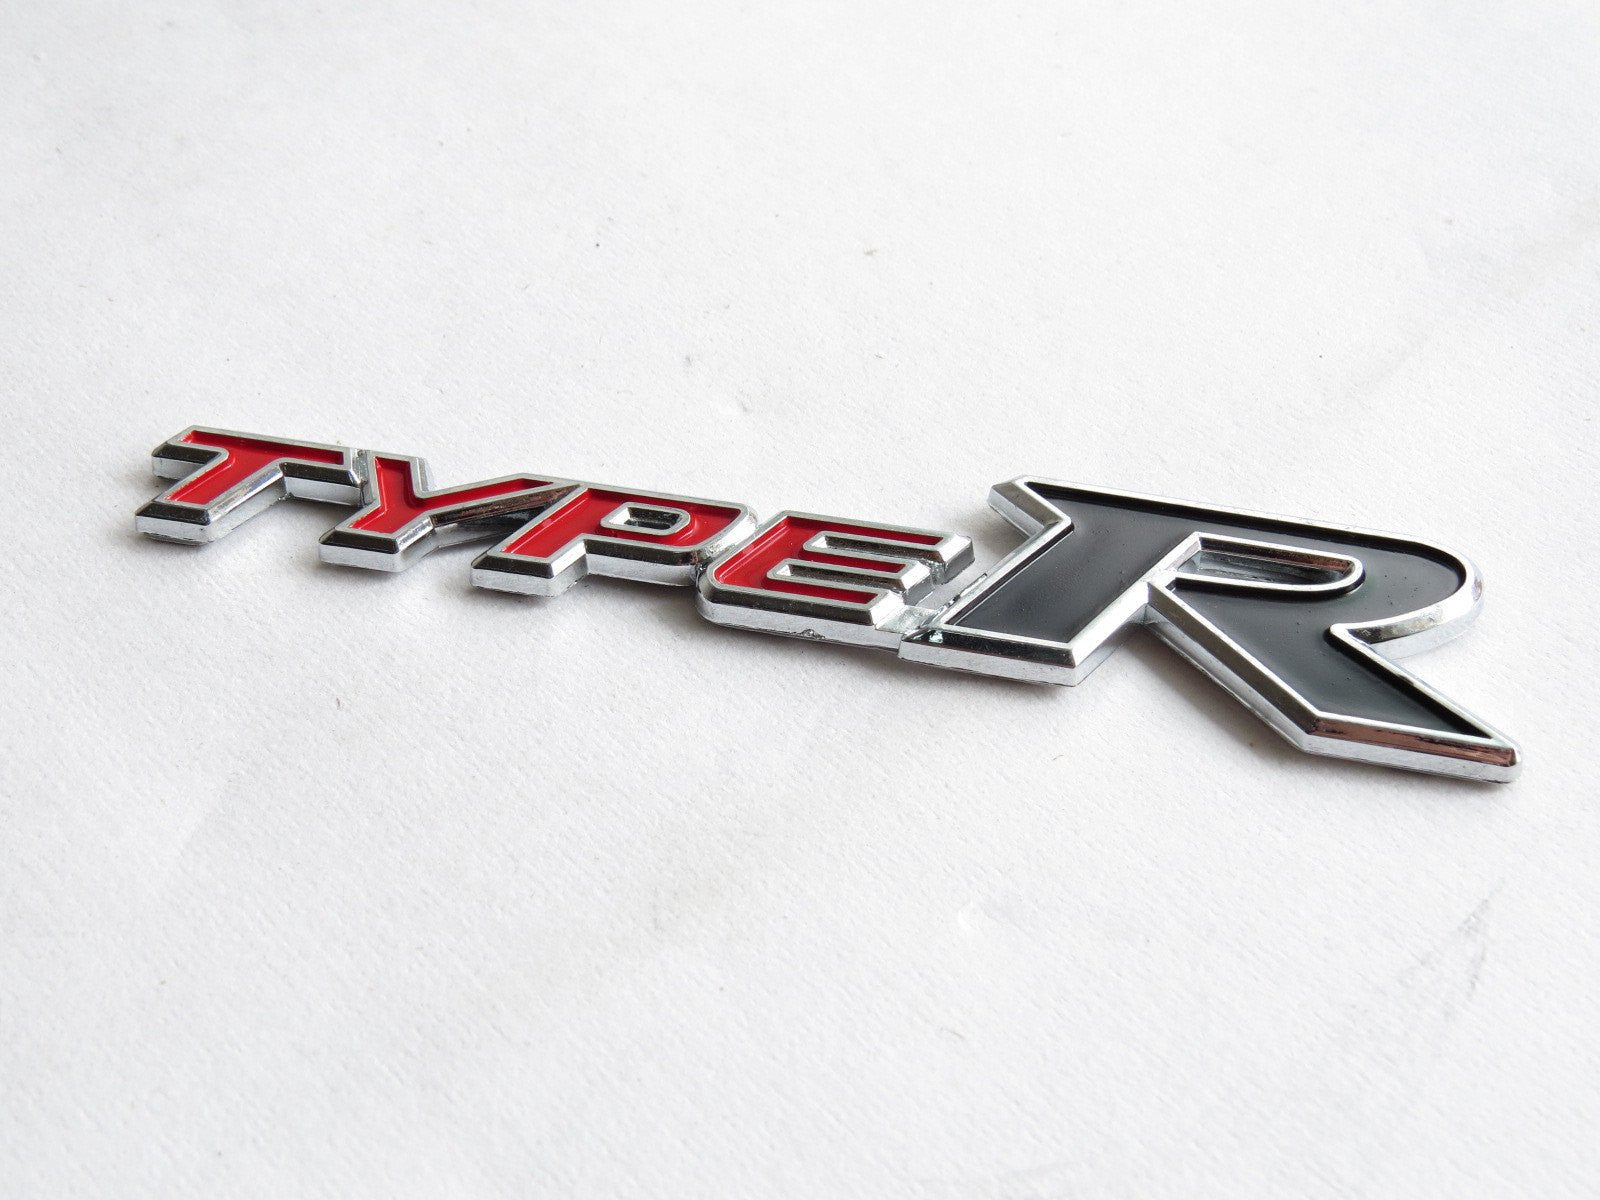 New Red & Black "TYPE-R" Chrome Plastic Emblem Badge for Honda - Pinalloy Online Auto Accessories Lightweight Car Kit 